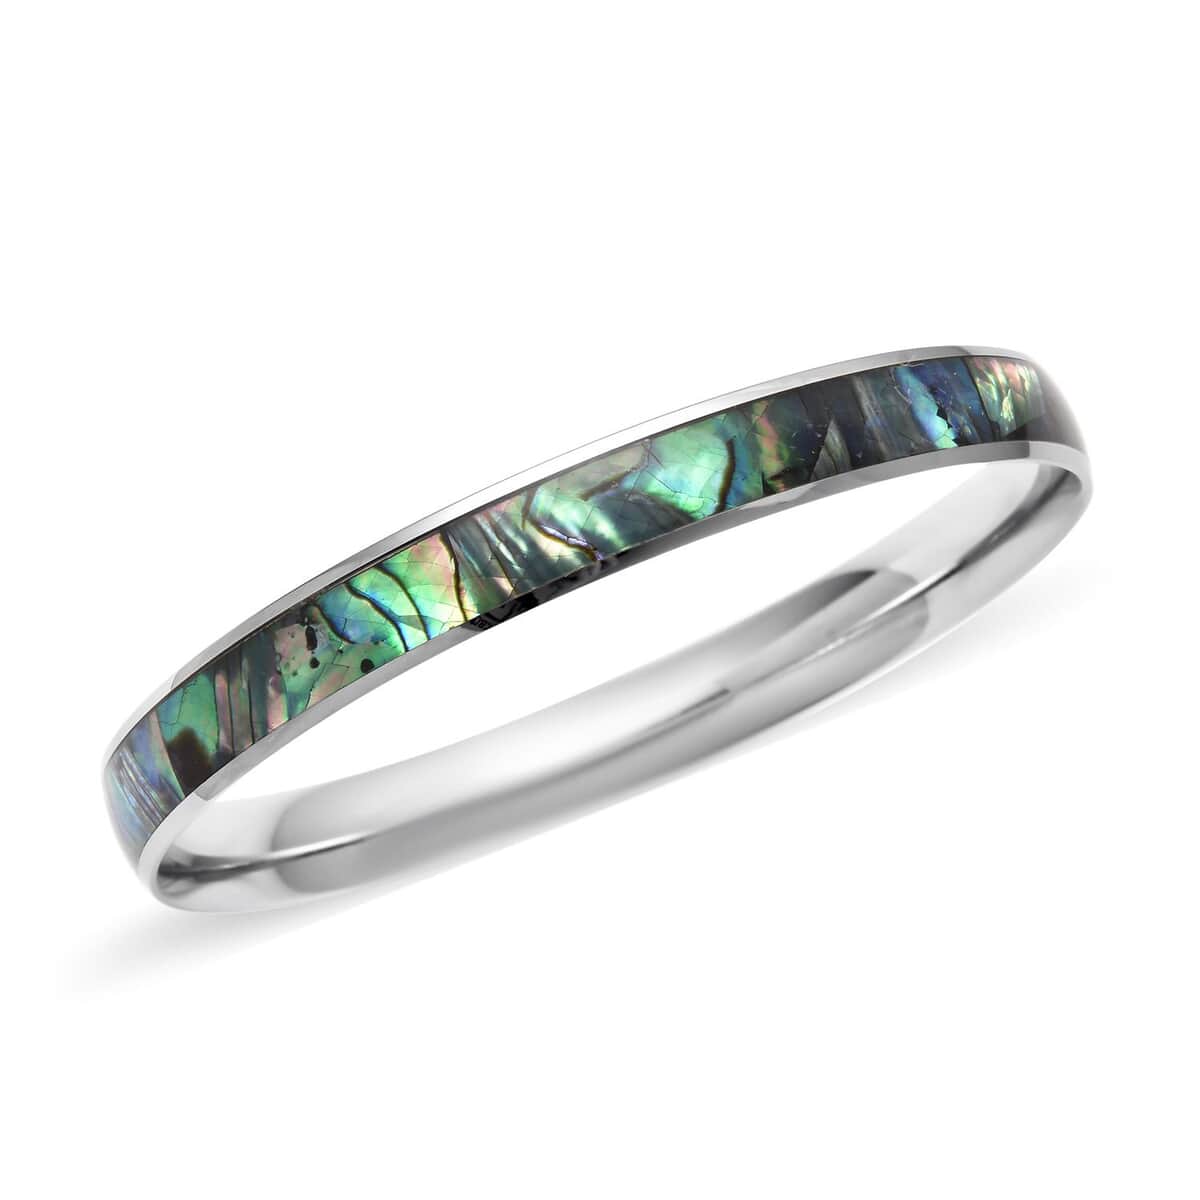 Abalone Shell Bangle Bracelet in Stainless Steel, Enamel Bracelet, Fashion Beach Jewelry For Women, Gift For Her (7.25 In) image number 0